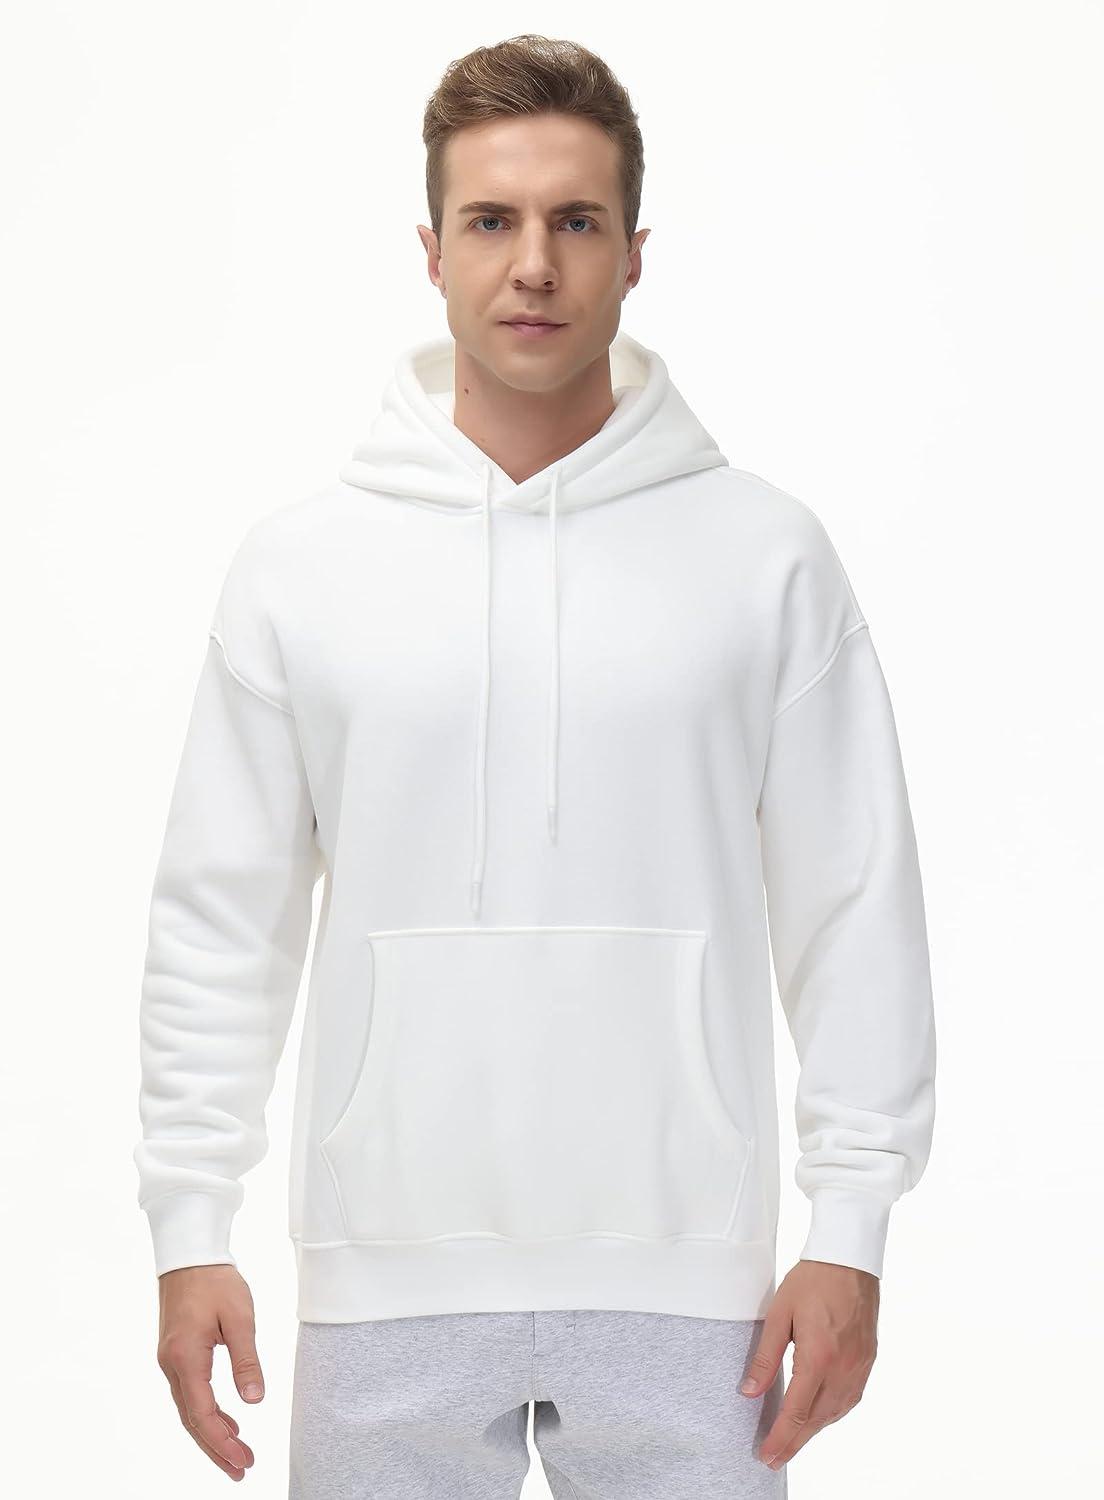 THE GYM PEOPLE Men's Fleece Pullover Hoodie Loose Fit Ultra Soft Hooded  Sweatshirt With Pockets White Large